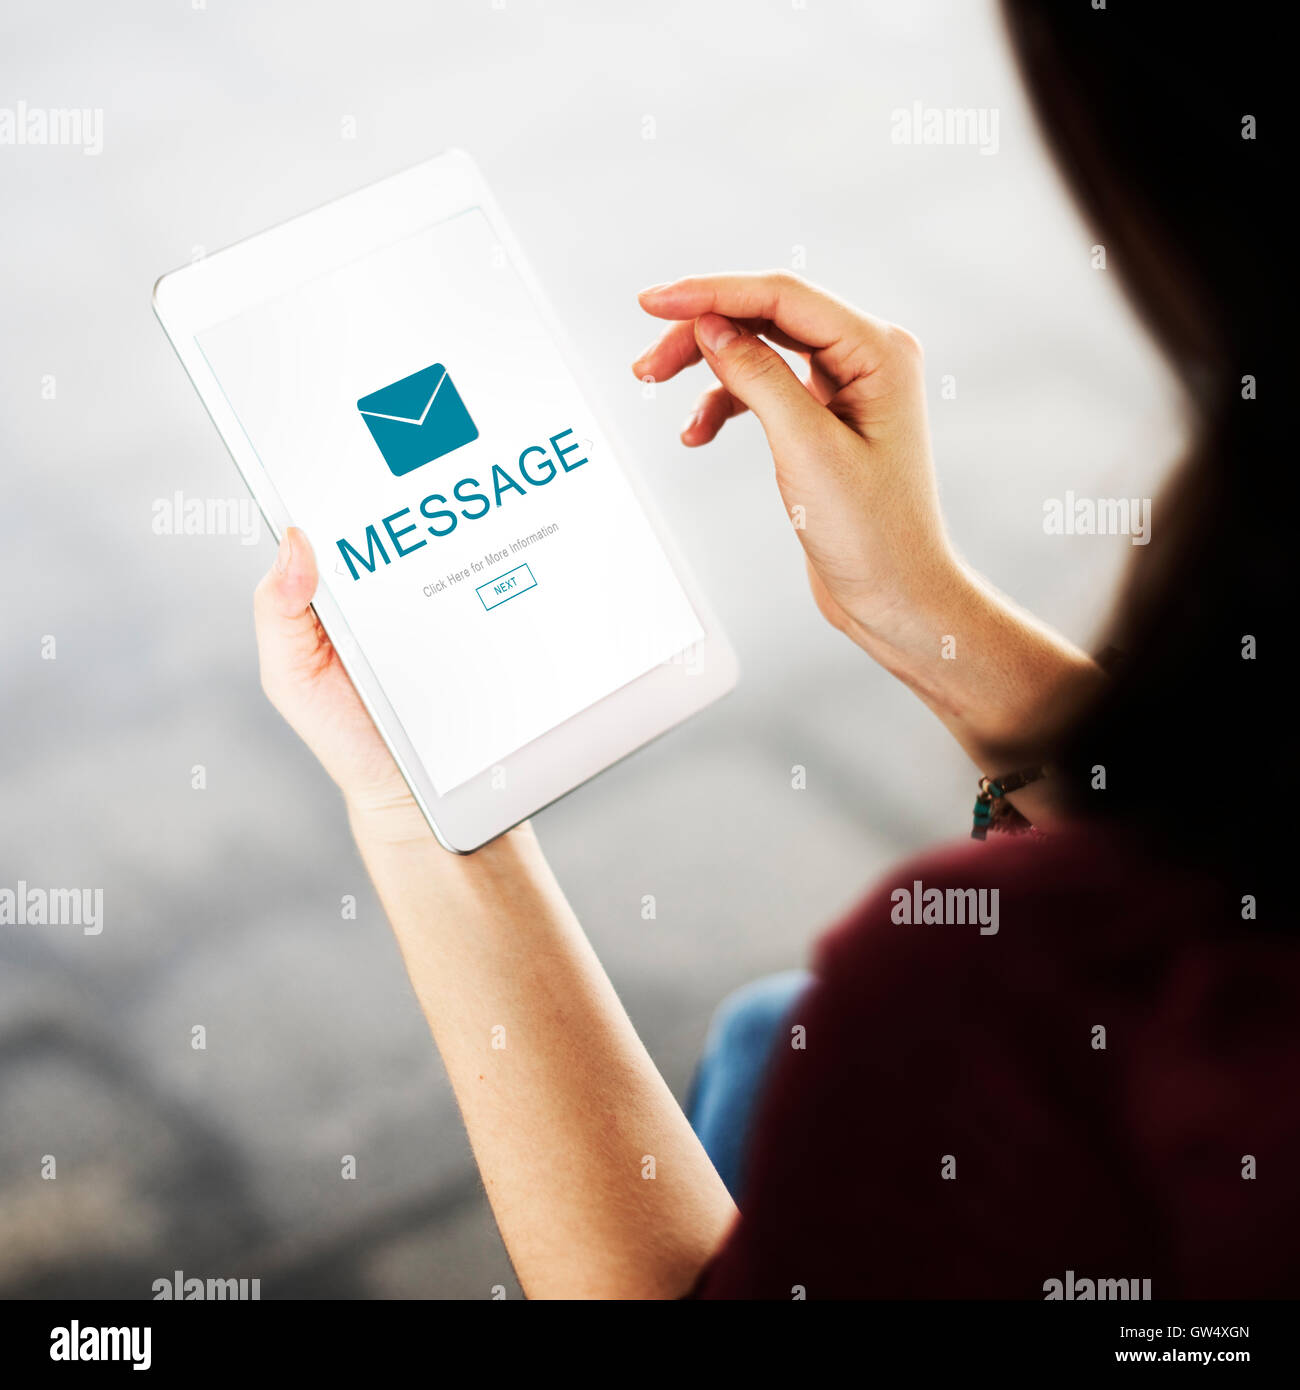 Message Contact Envelope Online Technology Concept Stock Photo